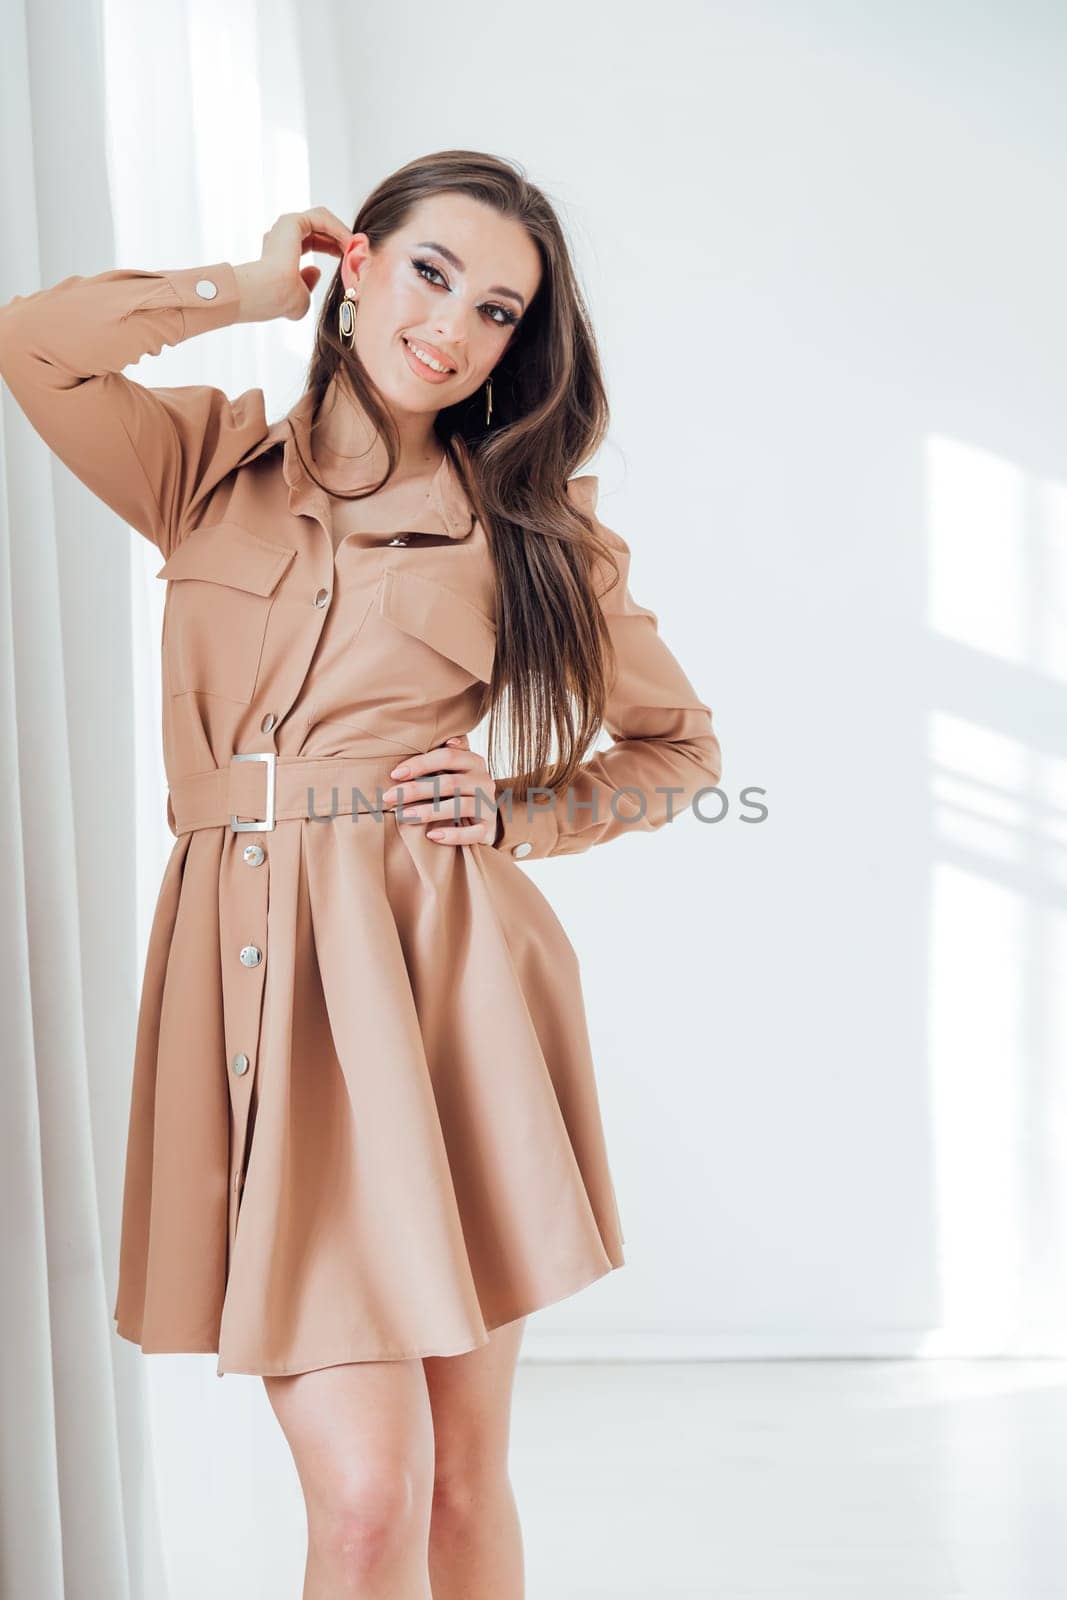 Beautiful woman in dress posing in bright room by Simakov